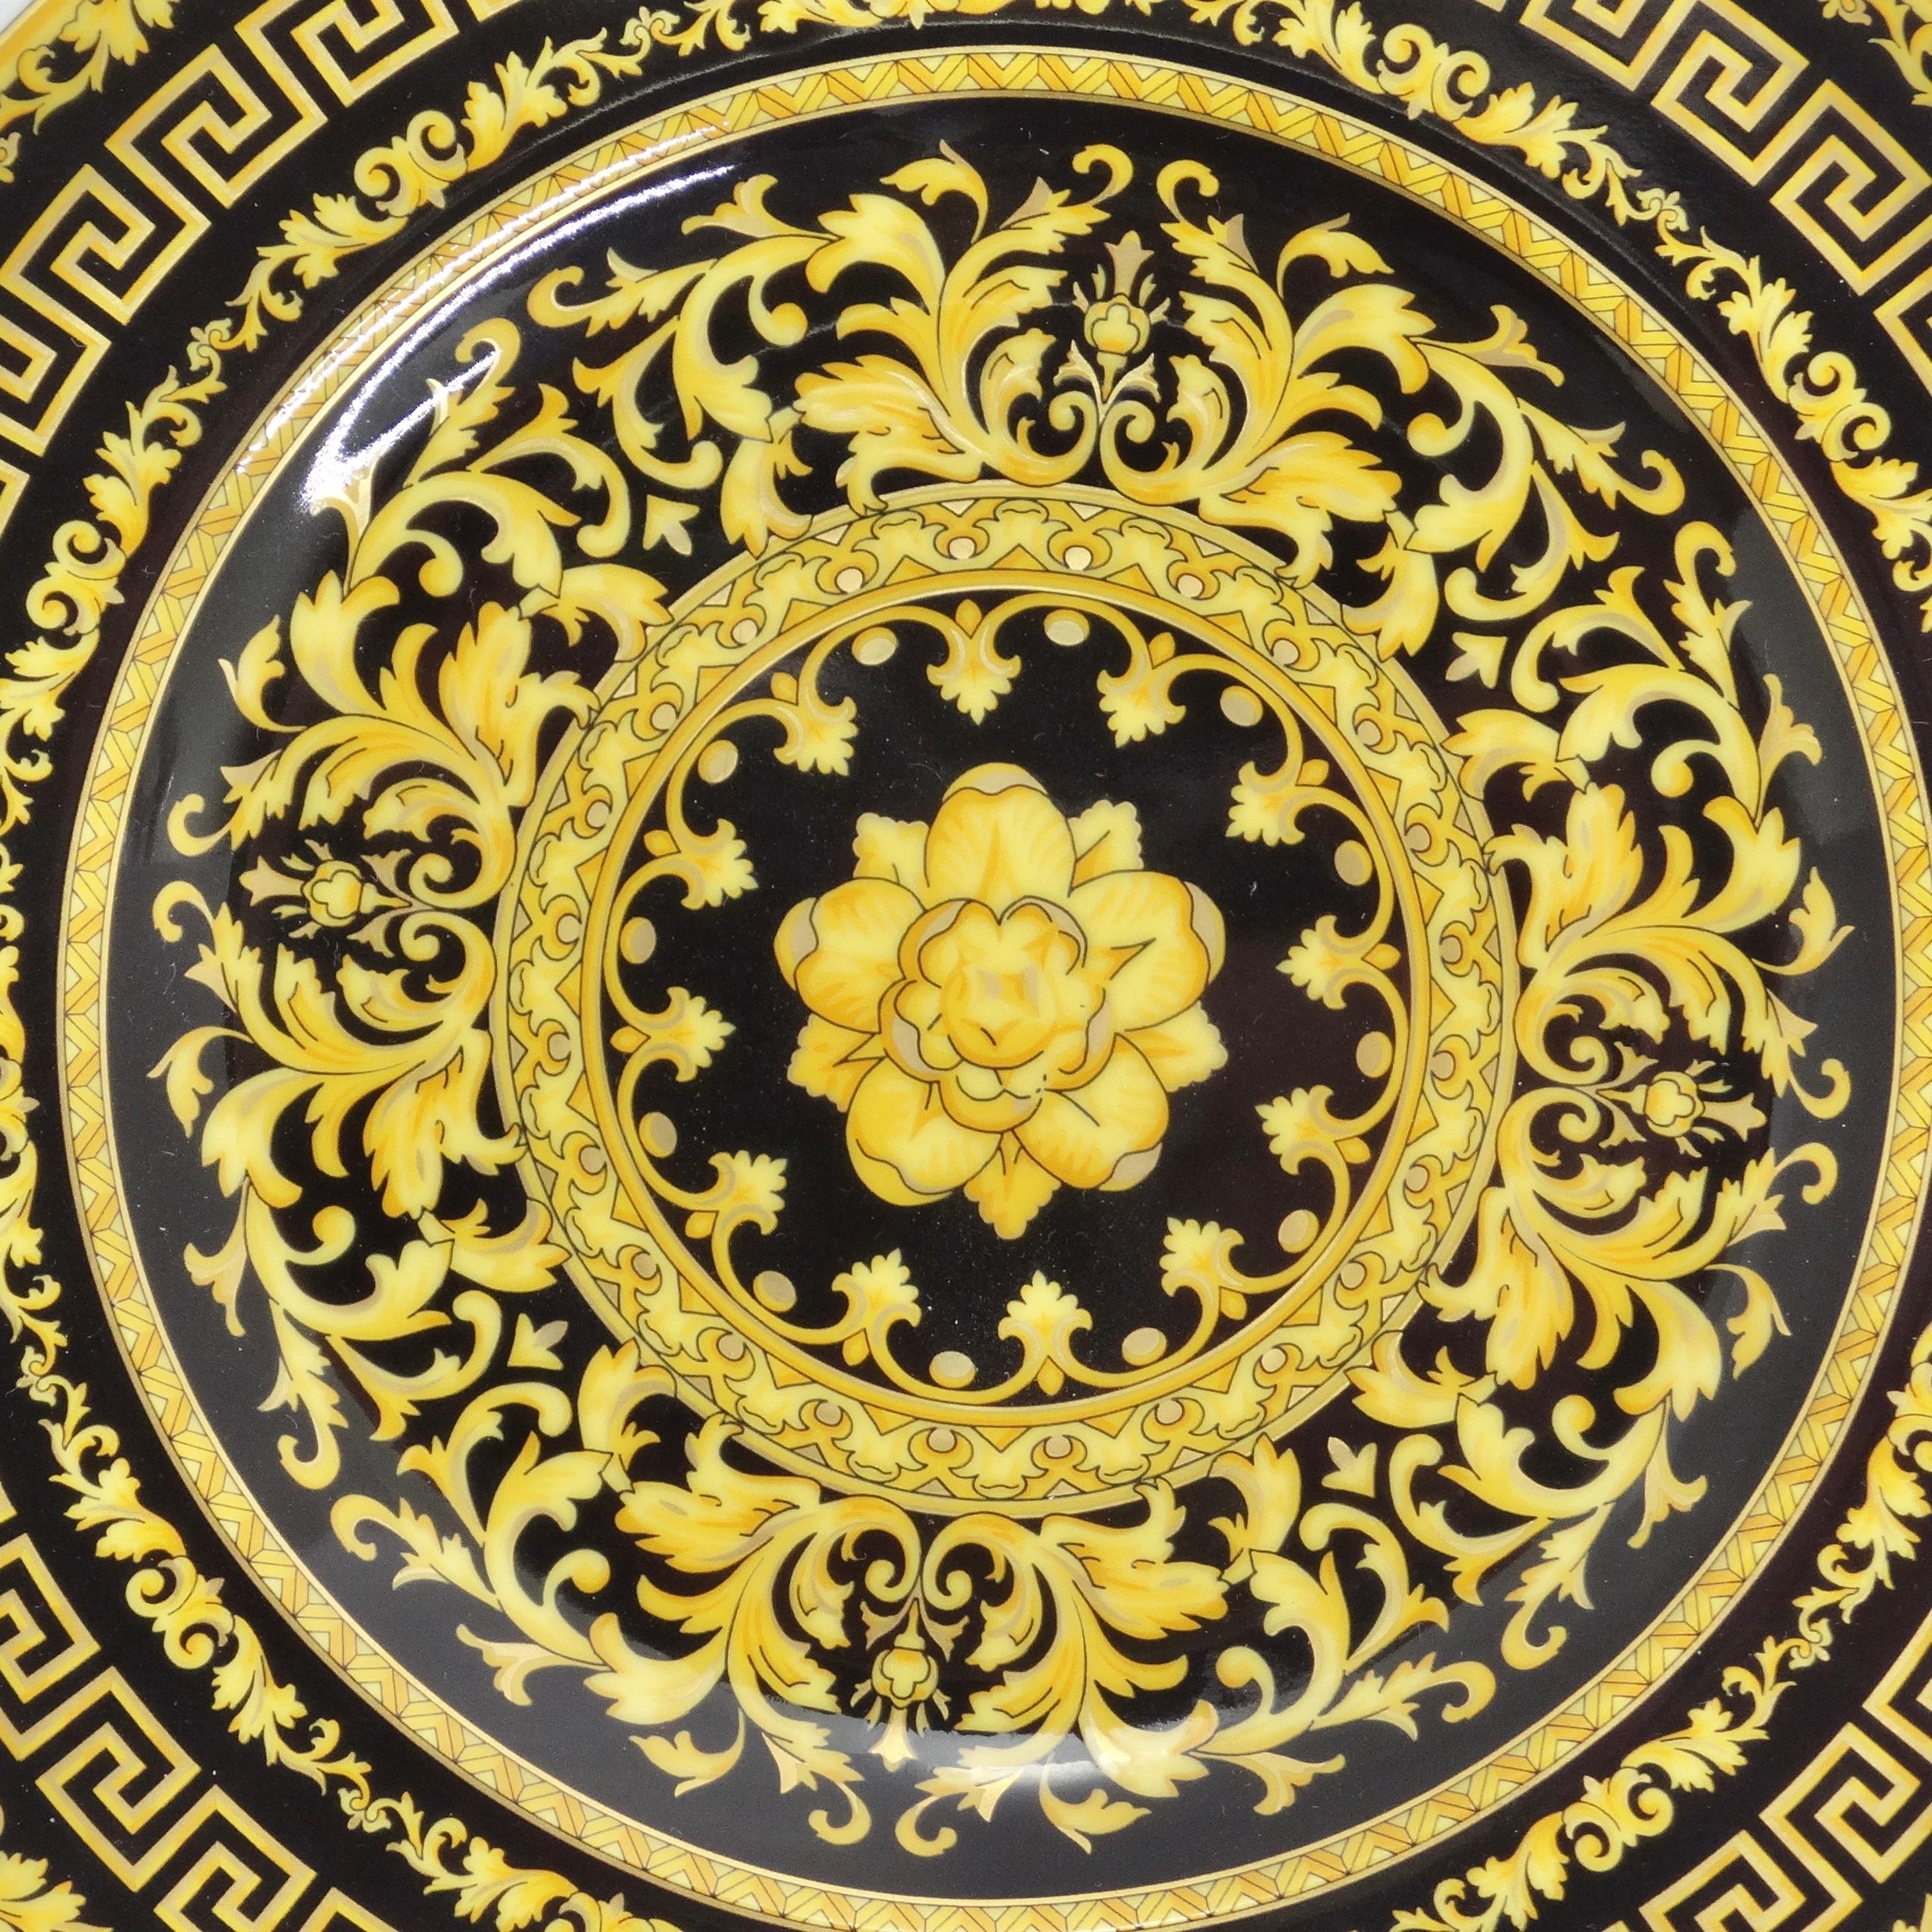 Introducing the Versace Rosenthal 1990s Porcelain Floral Gold Plate, a classic dinner plate that encapsulates the timeless elegance of Versace's signature style. This exquisite piece features a striking black and gold baroque print, showcasing the